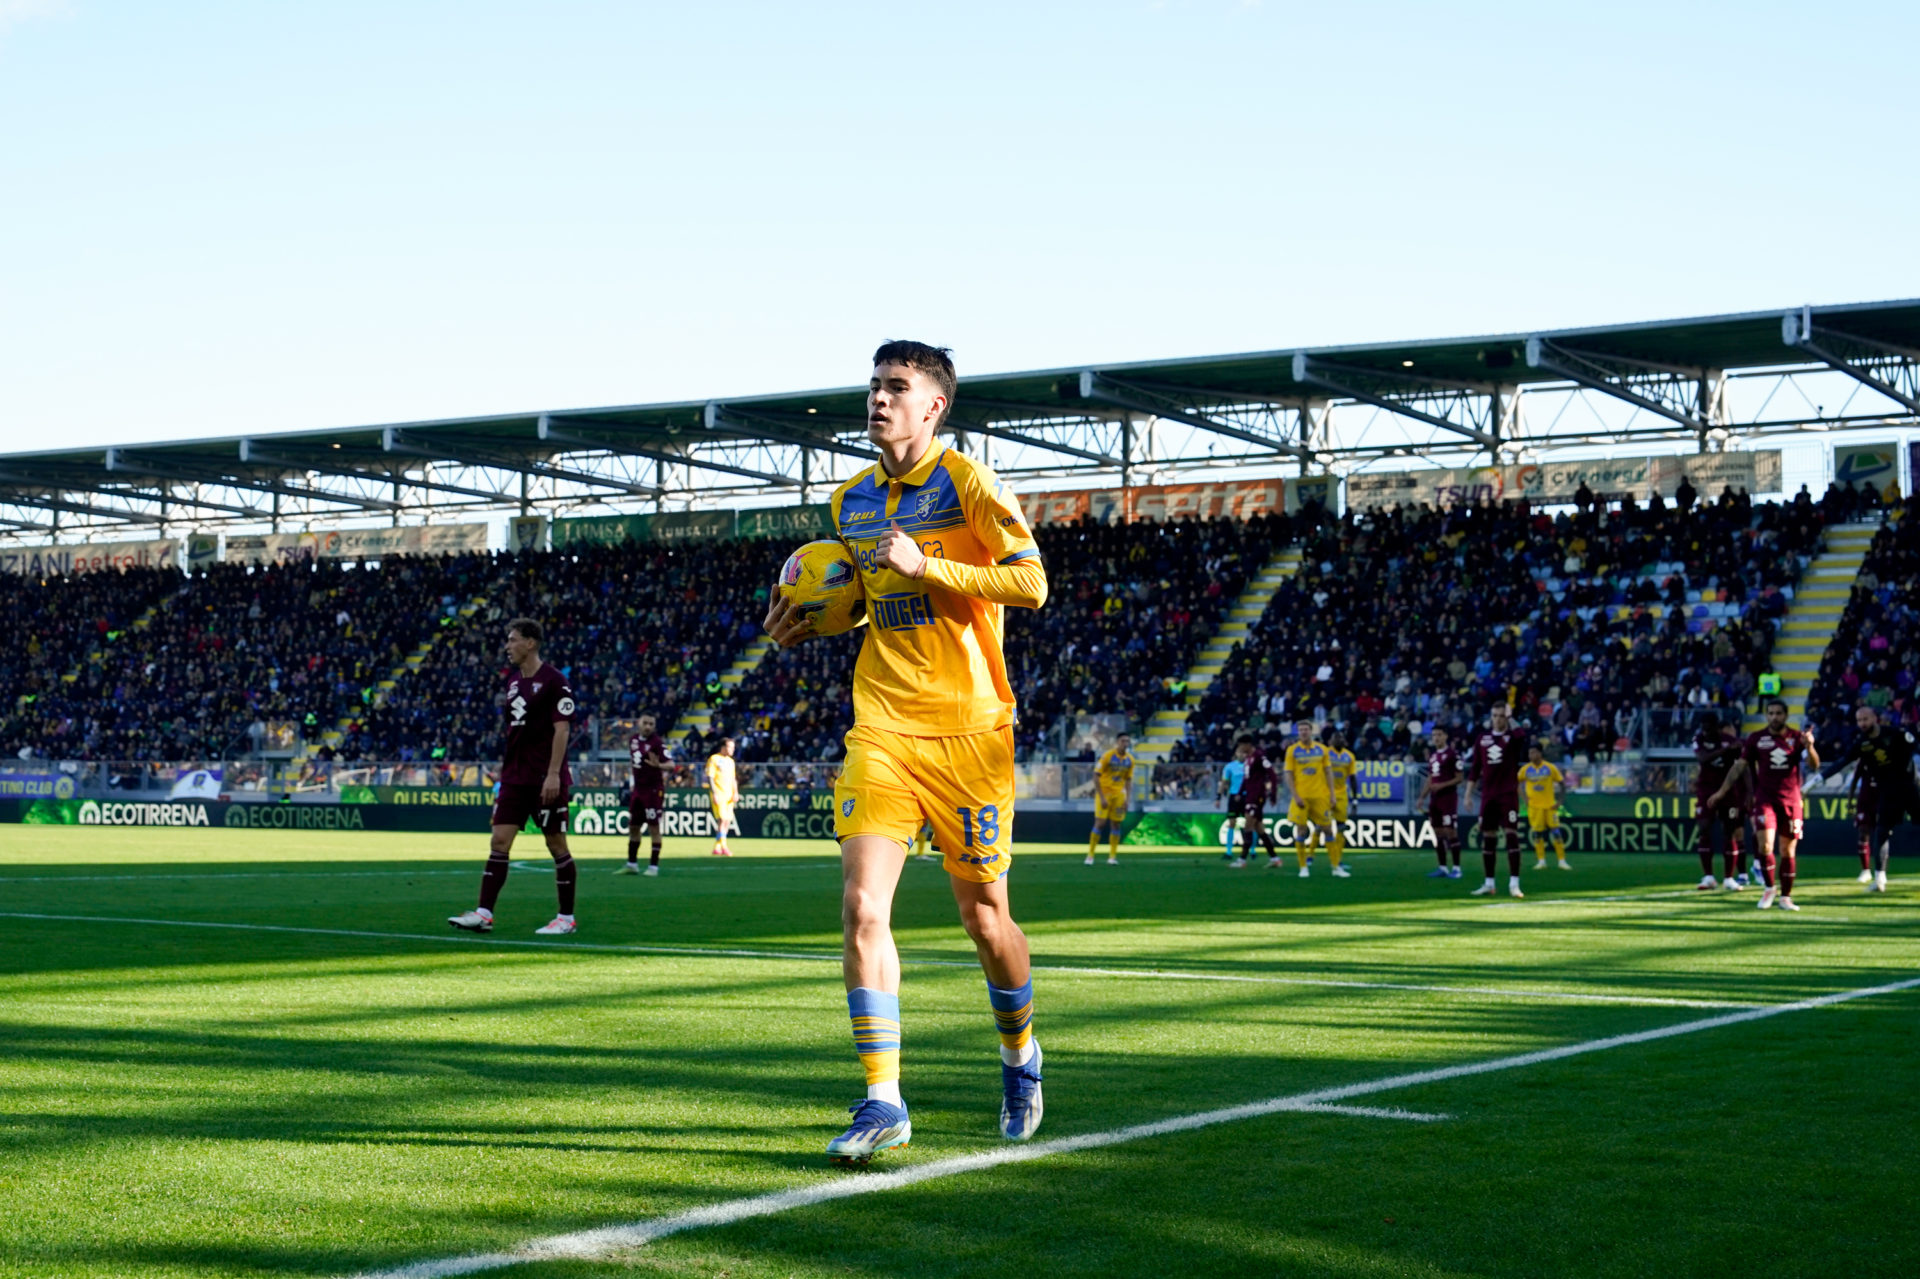 Matias Soulé has been Frosinone’s driving force so far and was one of the protagonists of the January window as well due to an offer from Al-Ittihad.